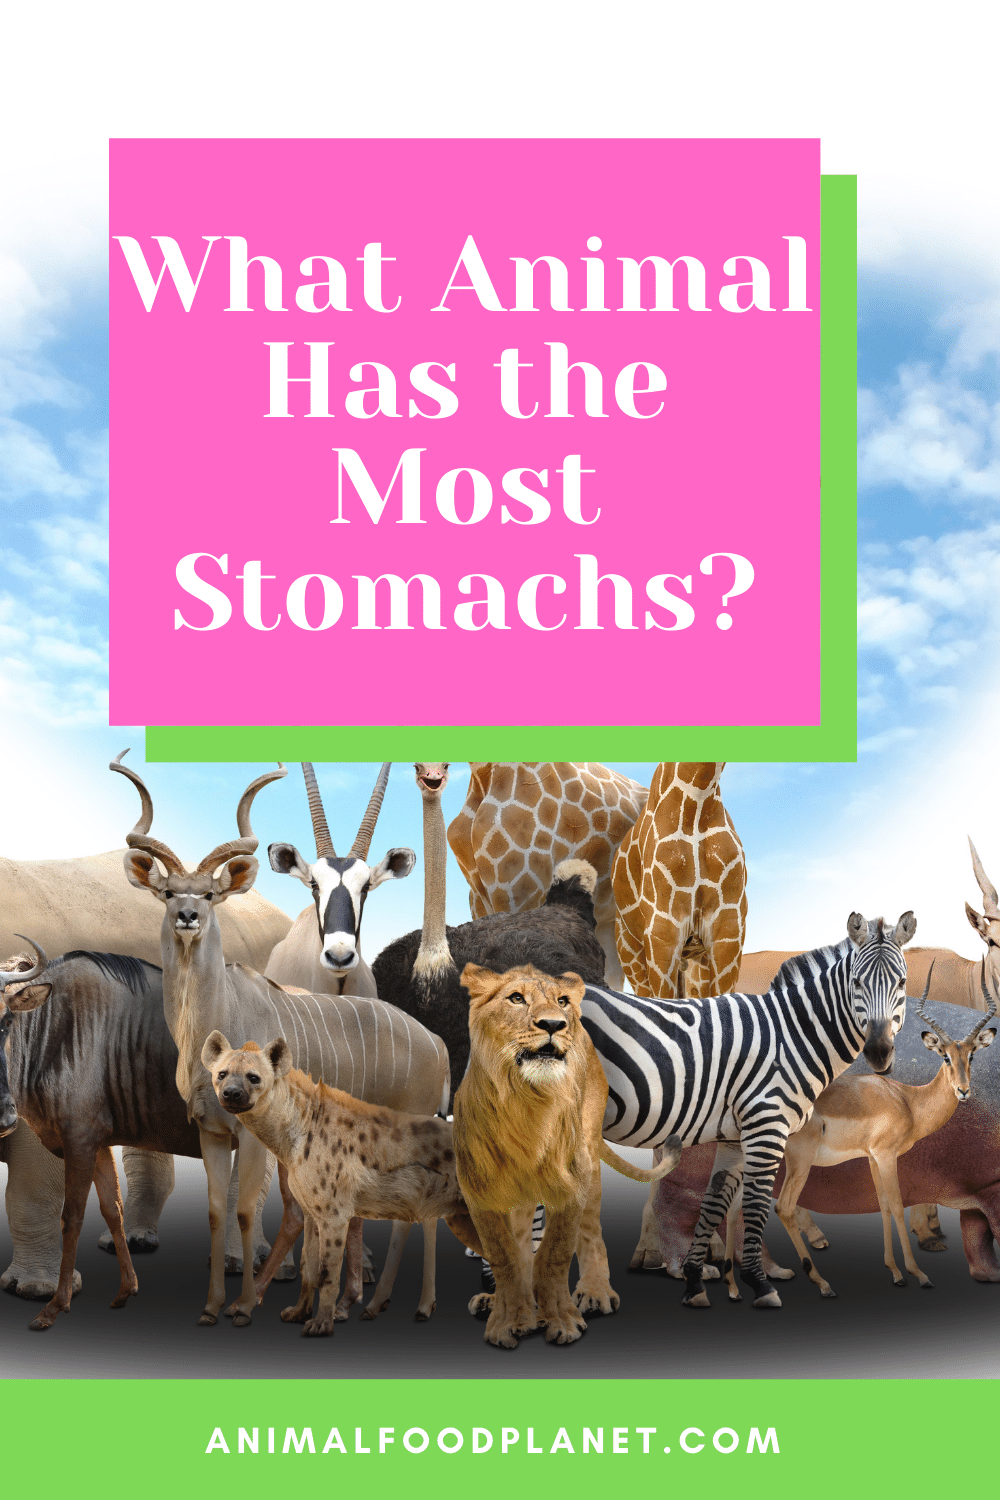 What Animal Has the Most Stomachs